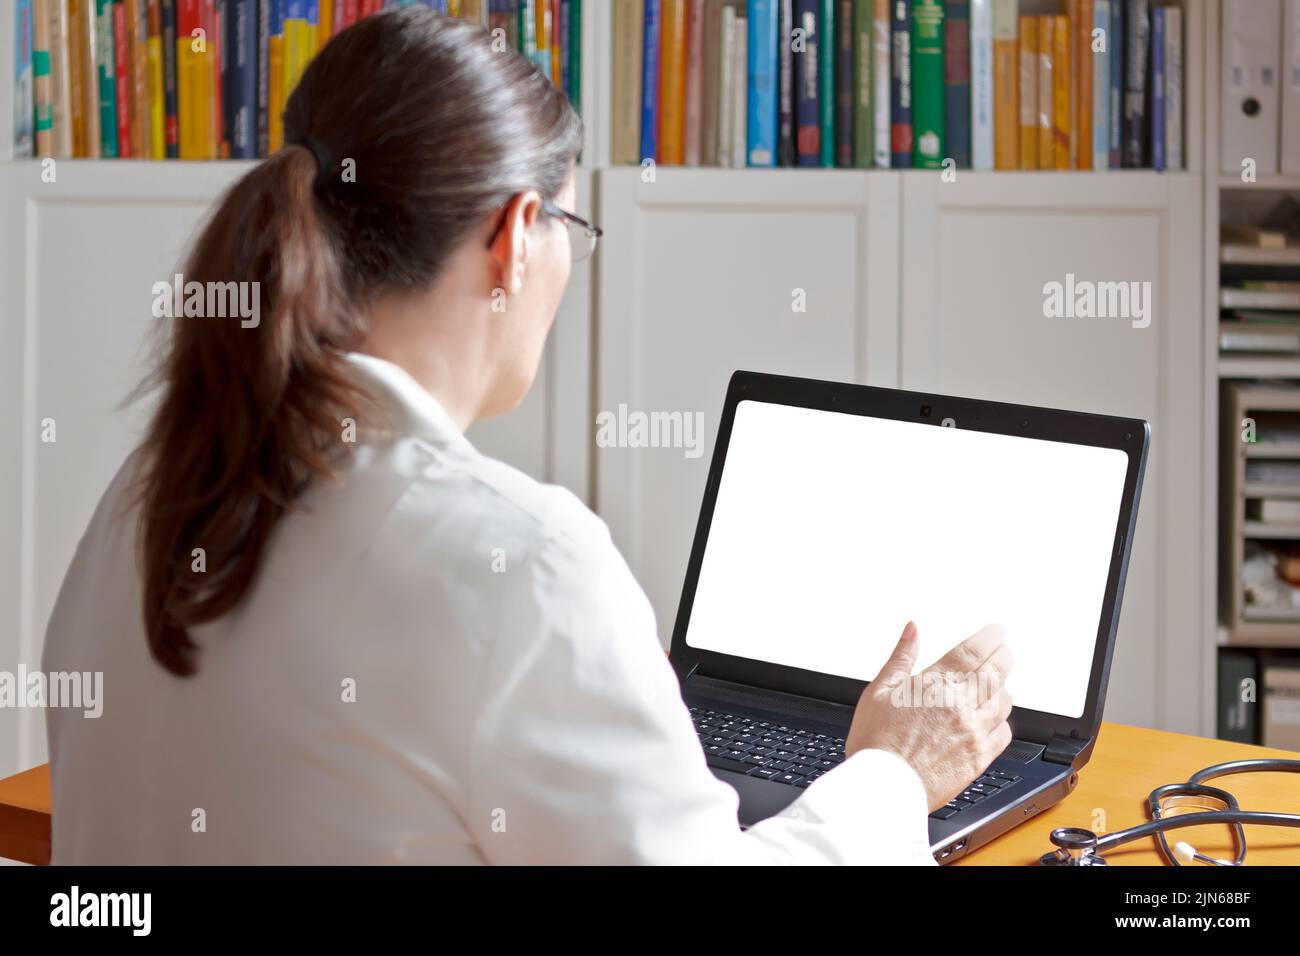 Telemedicine concept mock-up: female doctor or pharmacist talking in front of a laptop with a blank white screen. Stock Photo